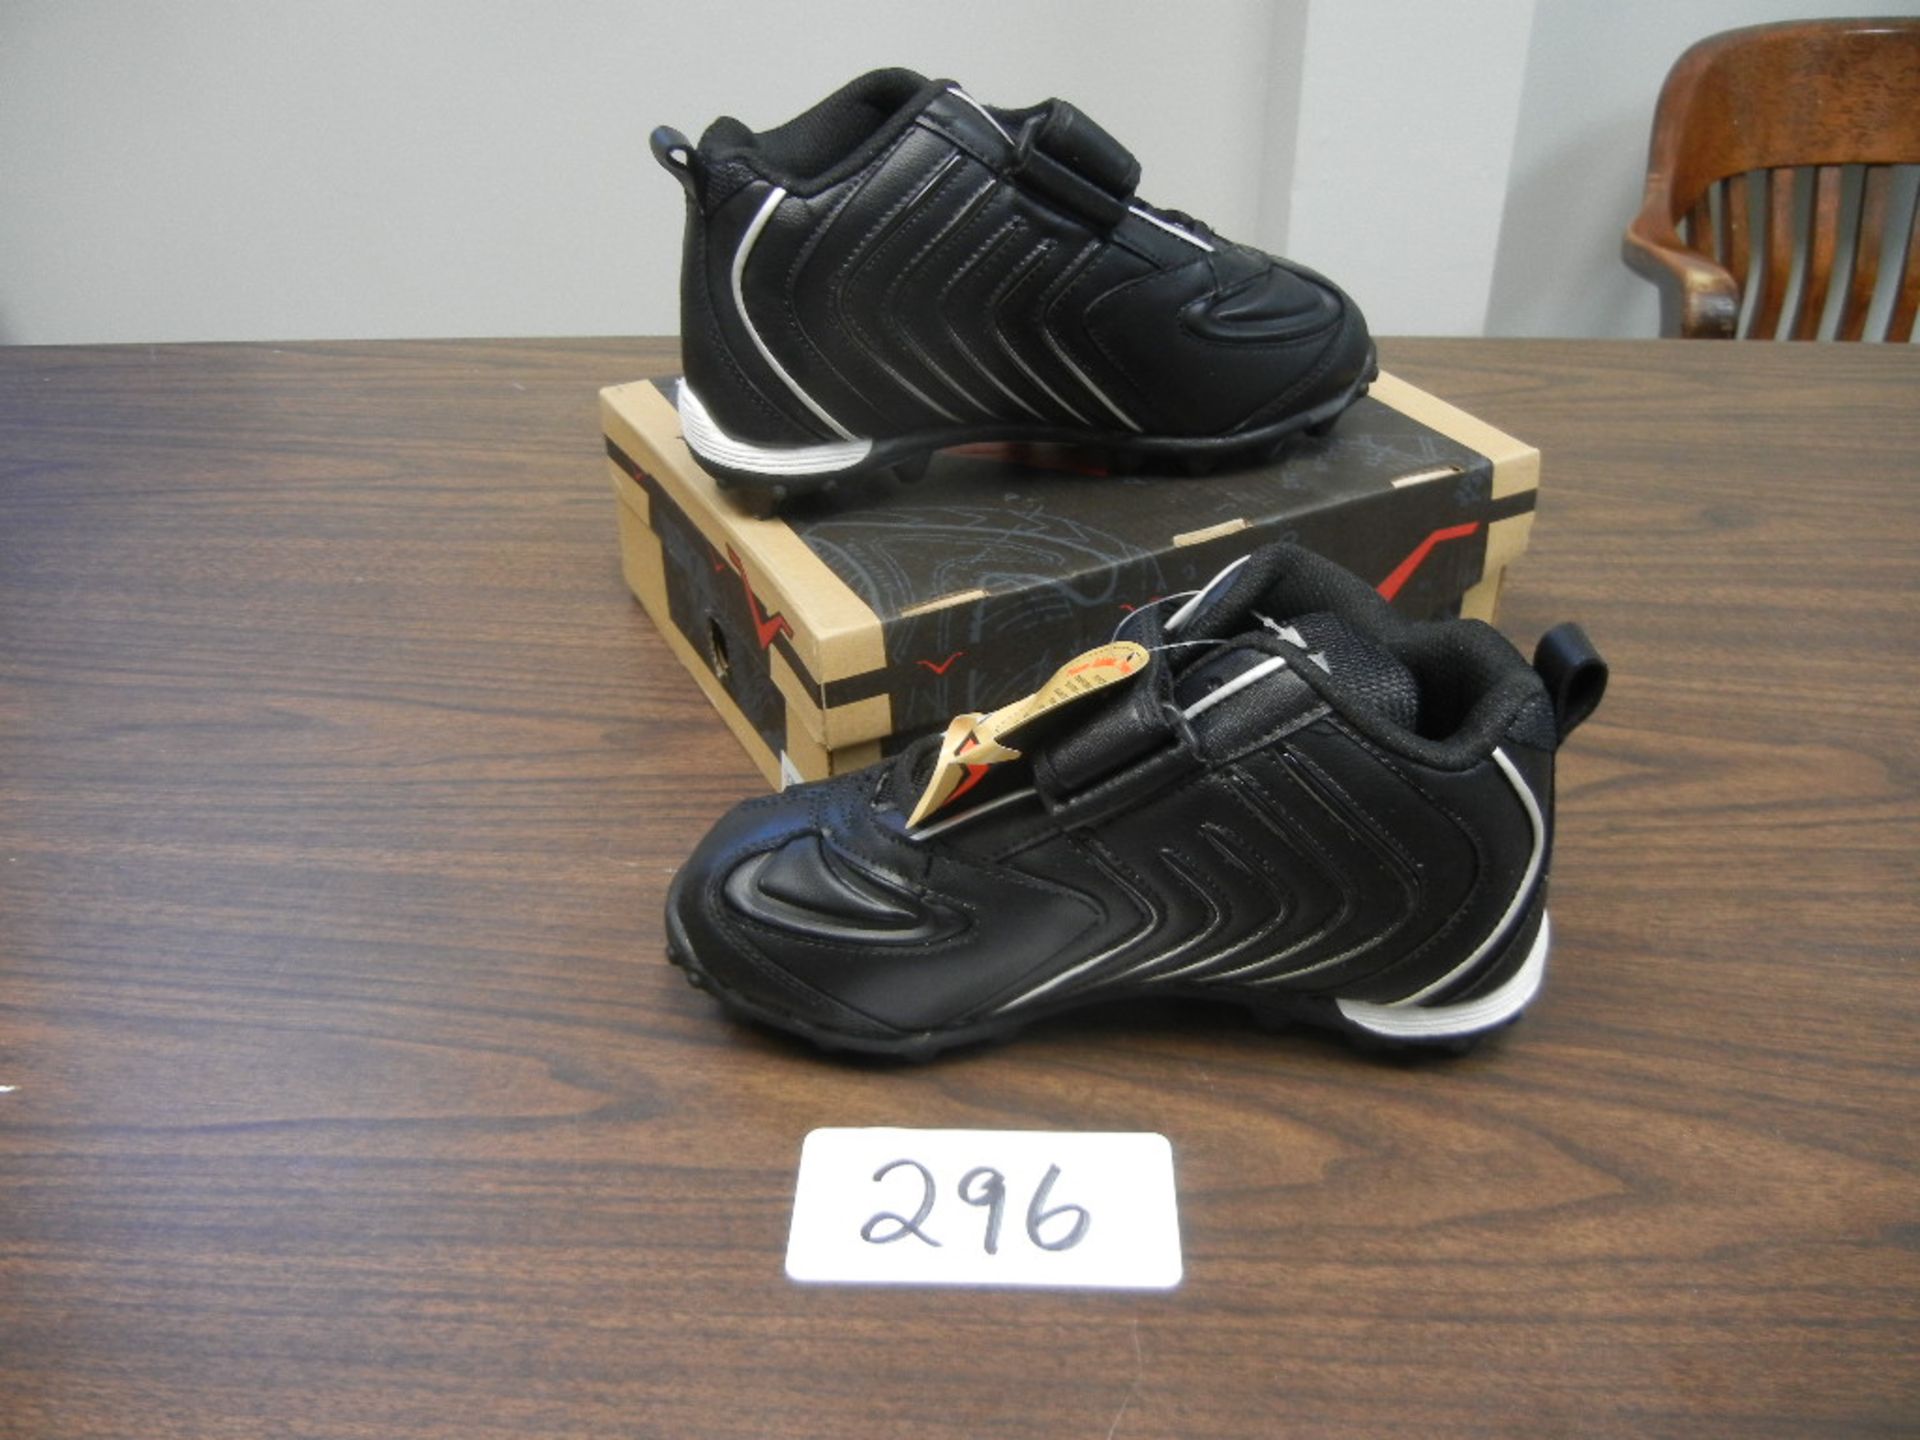 End Run Mid Youth Football Cleats Profile: 3/4 Height 12 pair each sizes 1-6 including half sizes